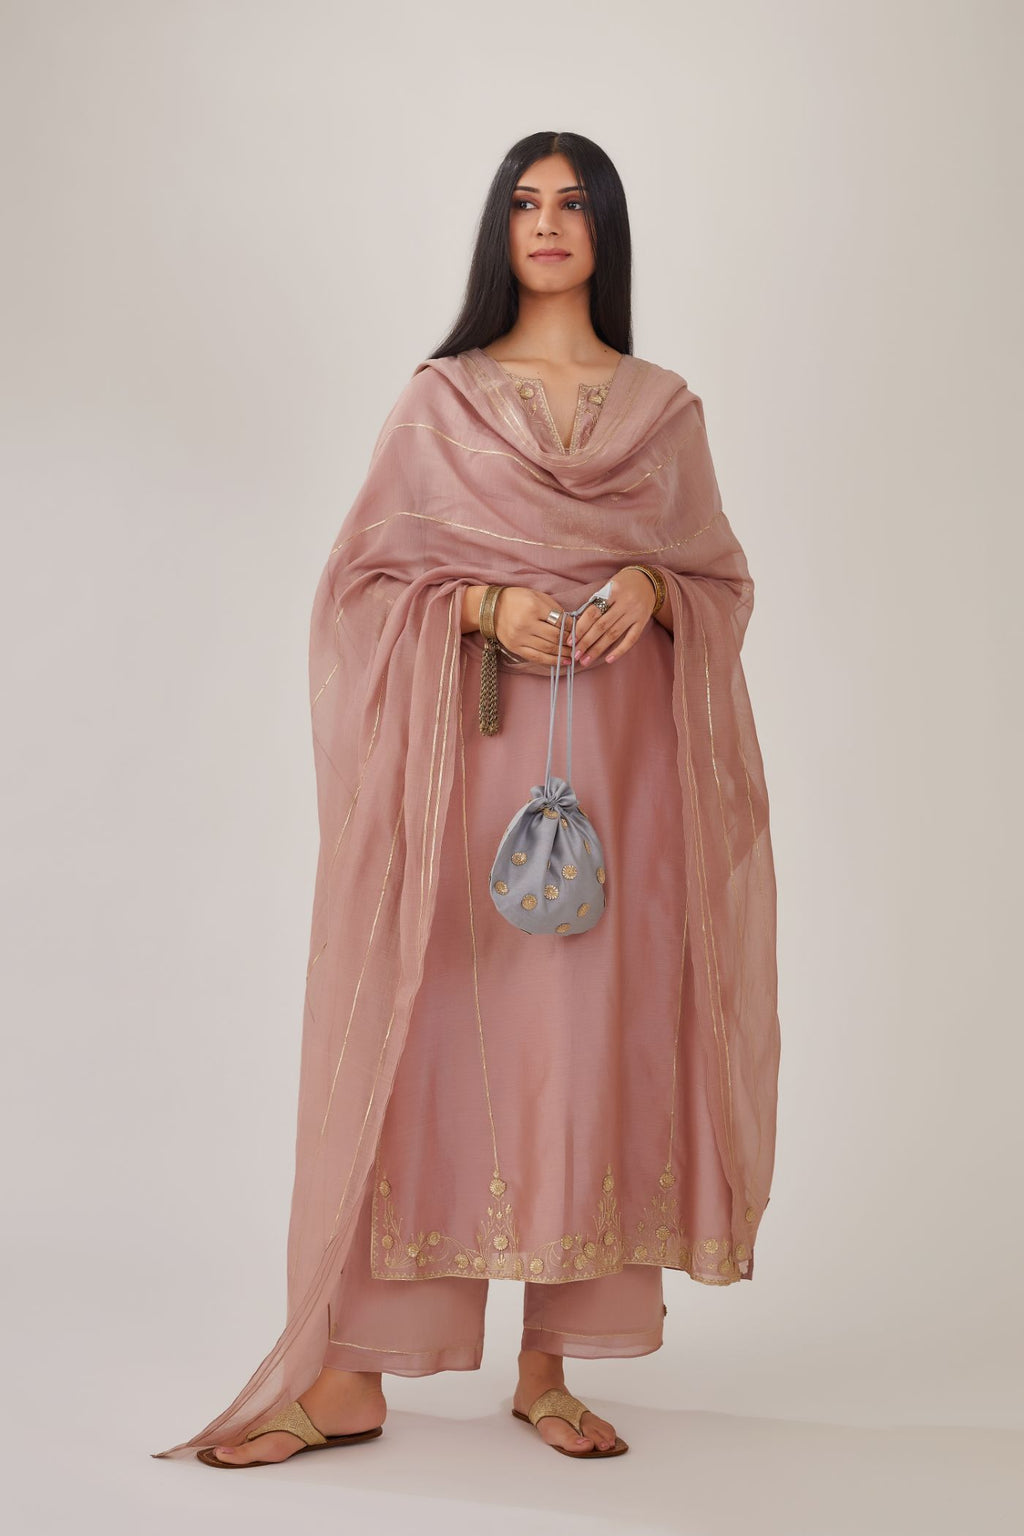 Lilac cotton chanderi dupatta highlighted with all-over gota work